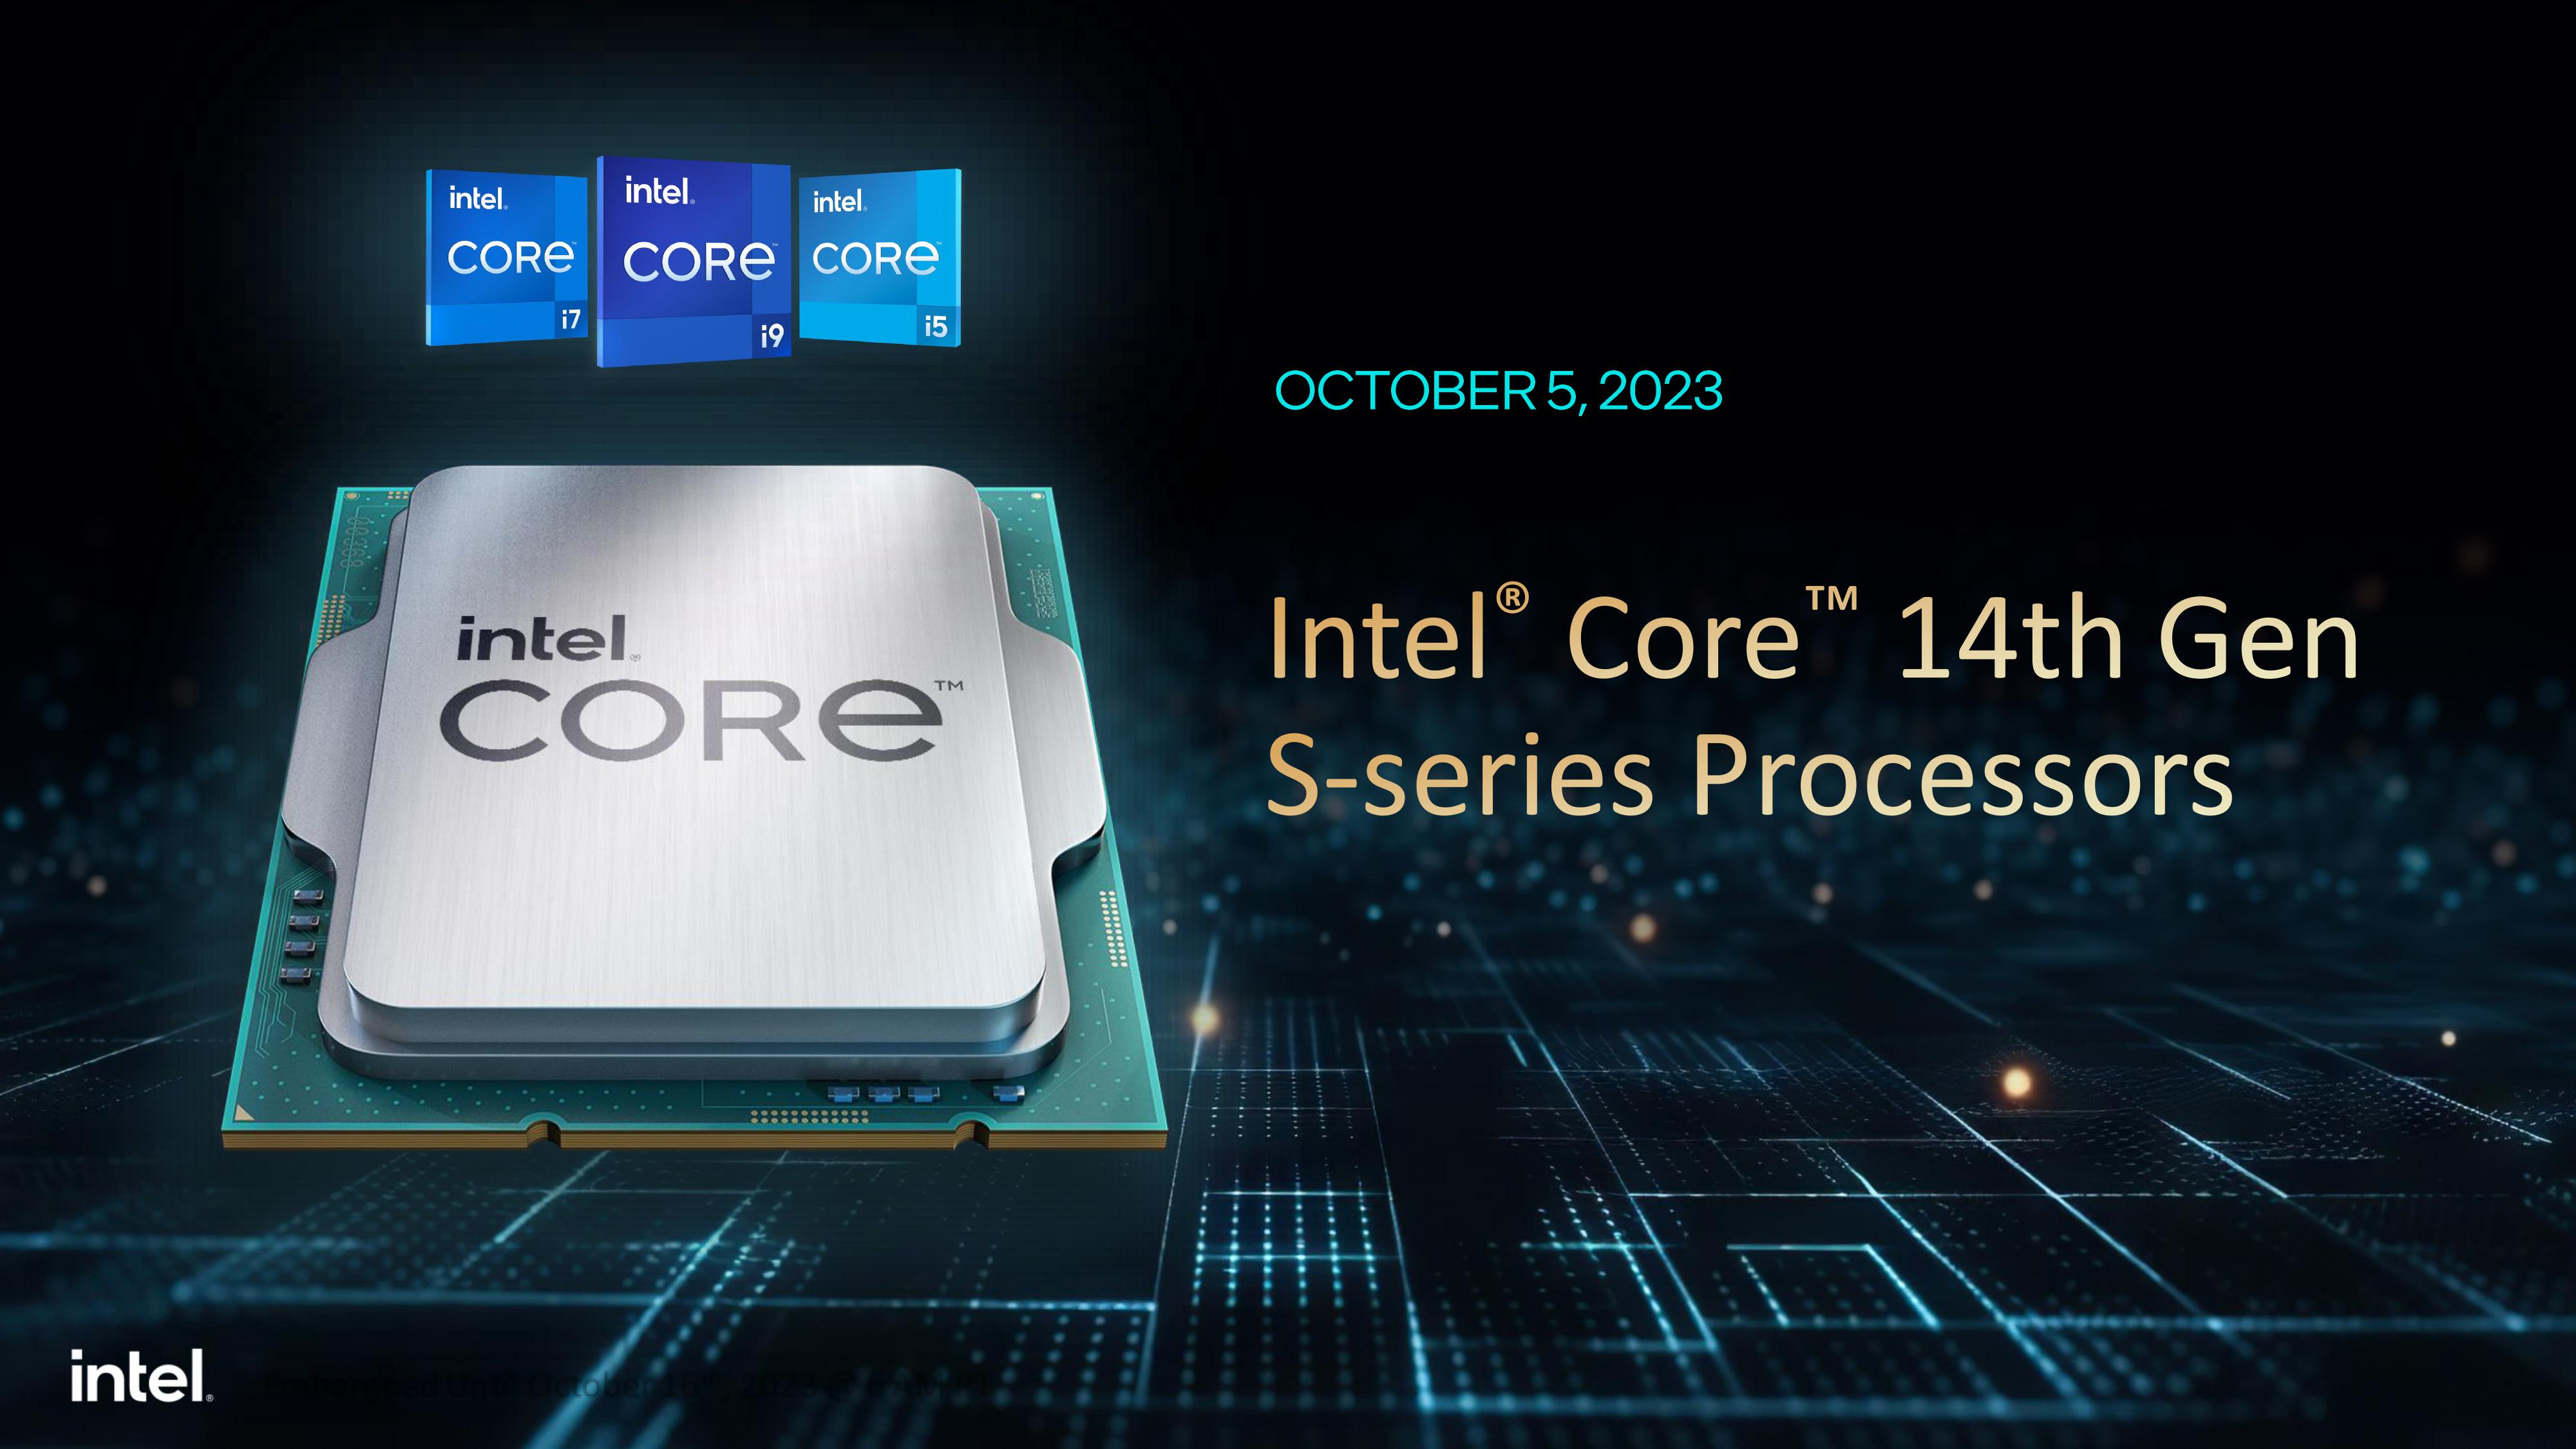 Intel Core i7-14700K CPU With 20 Cores Spotted Running At 6.3 GHz